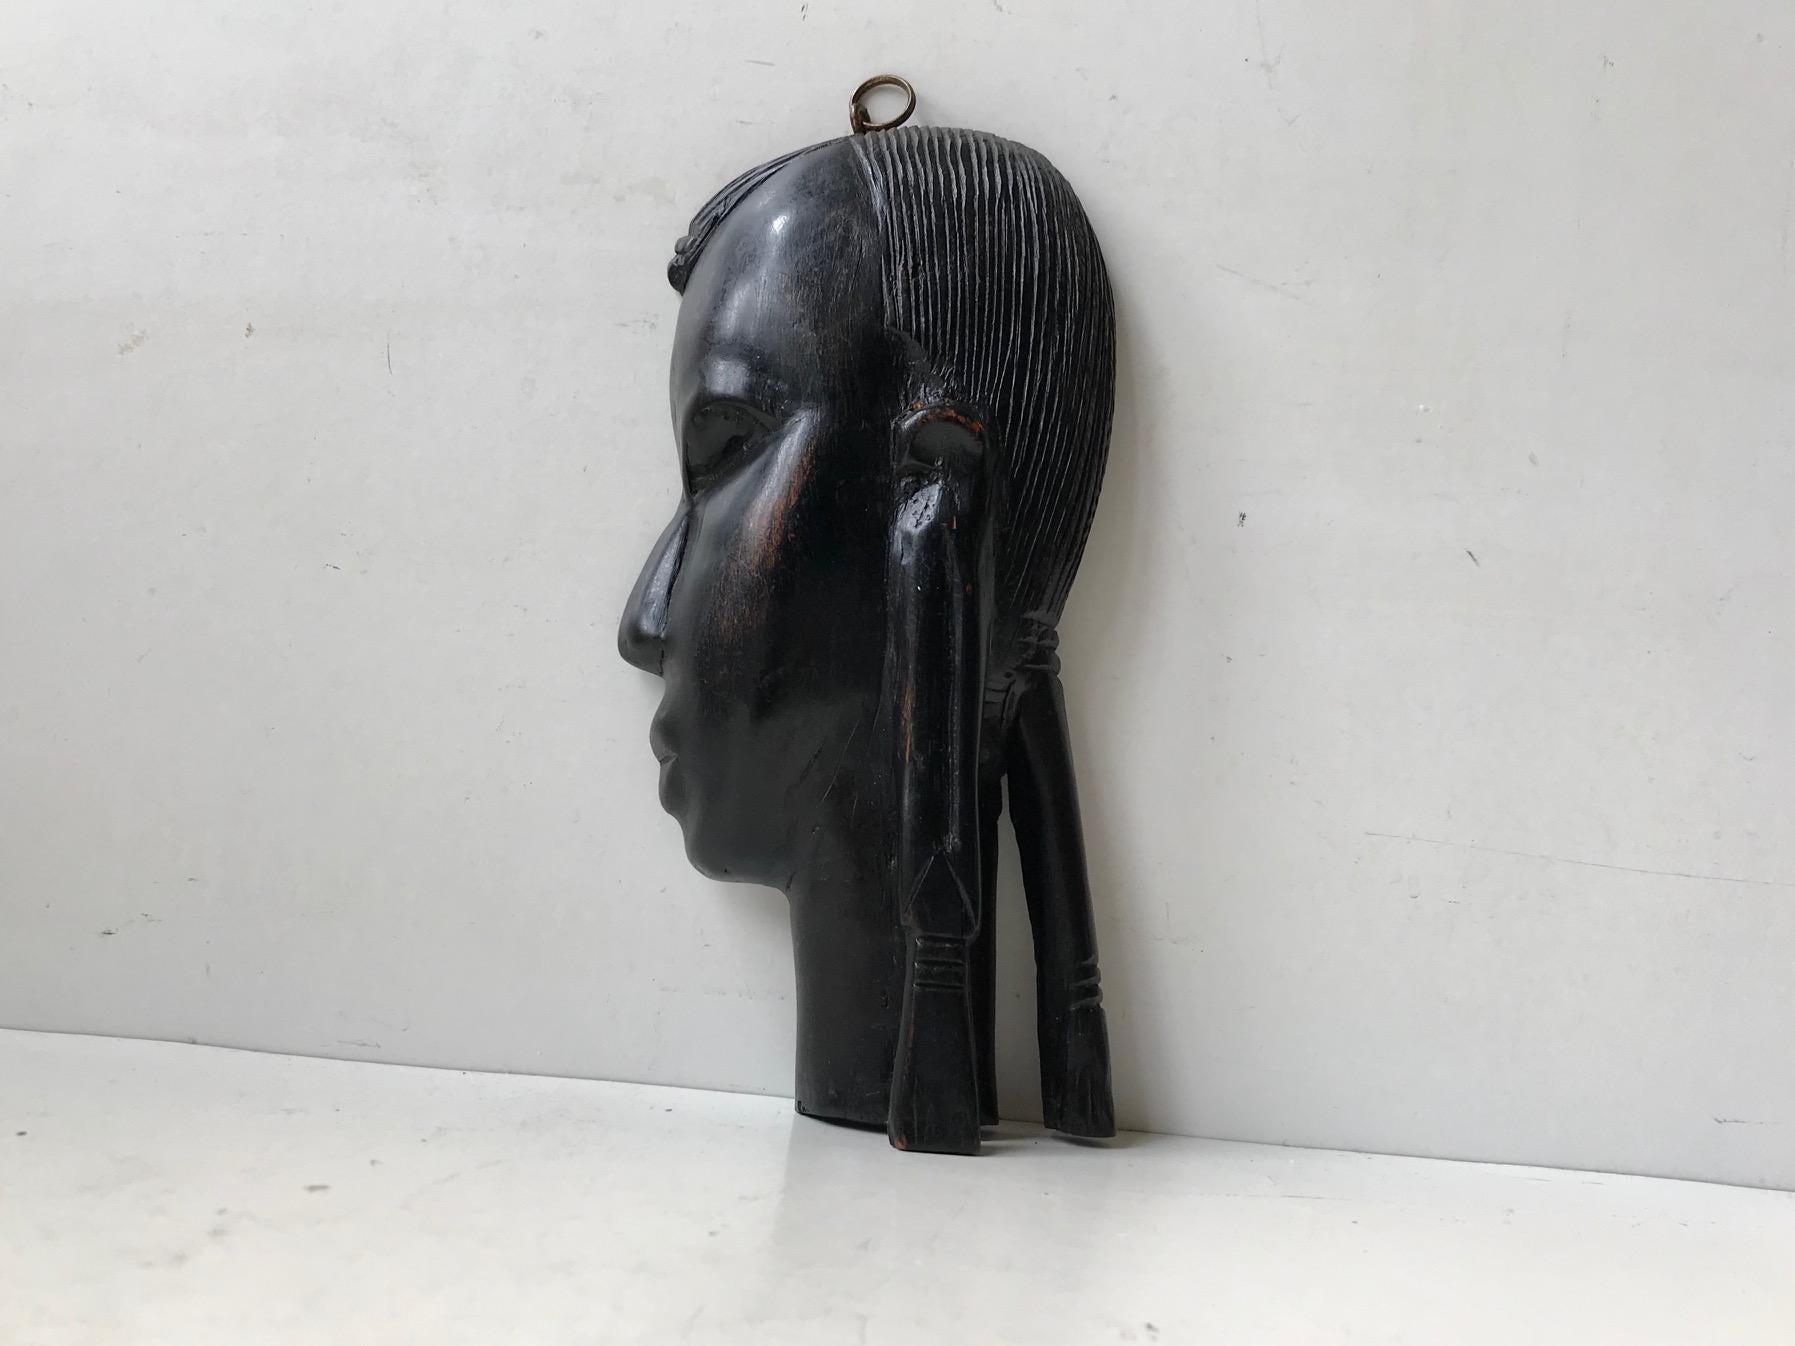 African wall plaque depicting a warrior in profile. It is made from dense/heavy ebony by a trained artisan probably in Lagos circa 1960-70. It is wall hung via a brass loop. It has no markings. Measurements: H: 21, W: 10 cm.